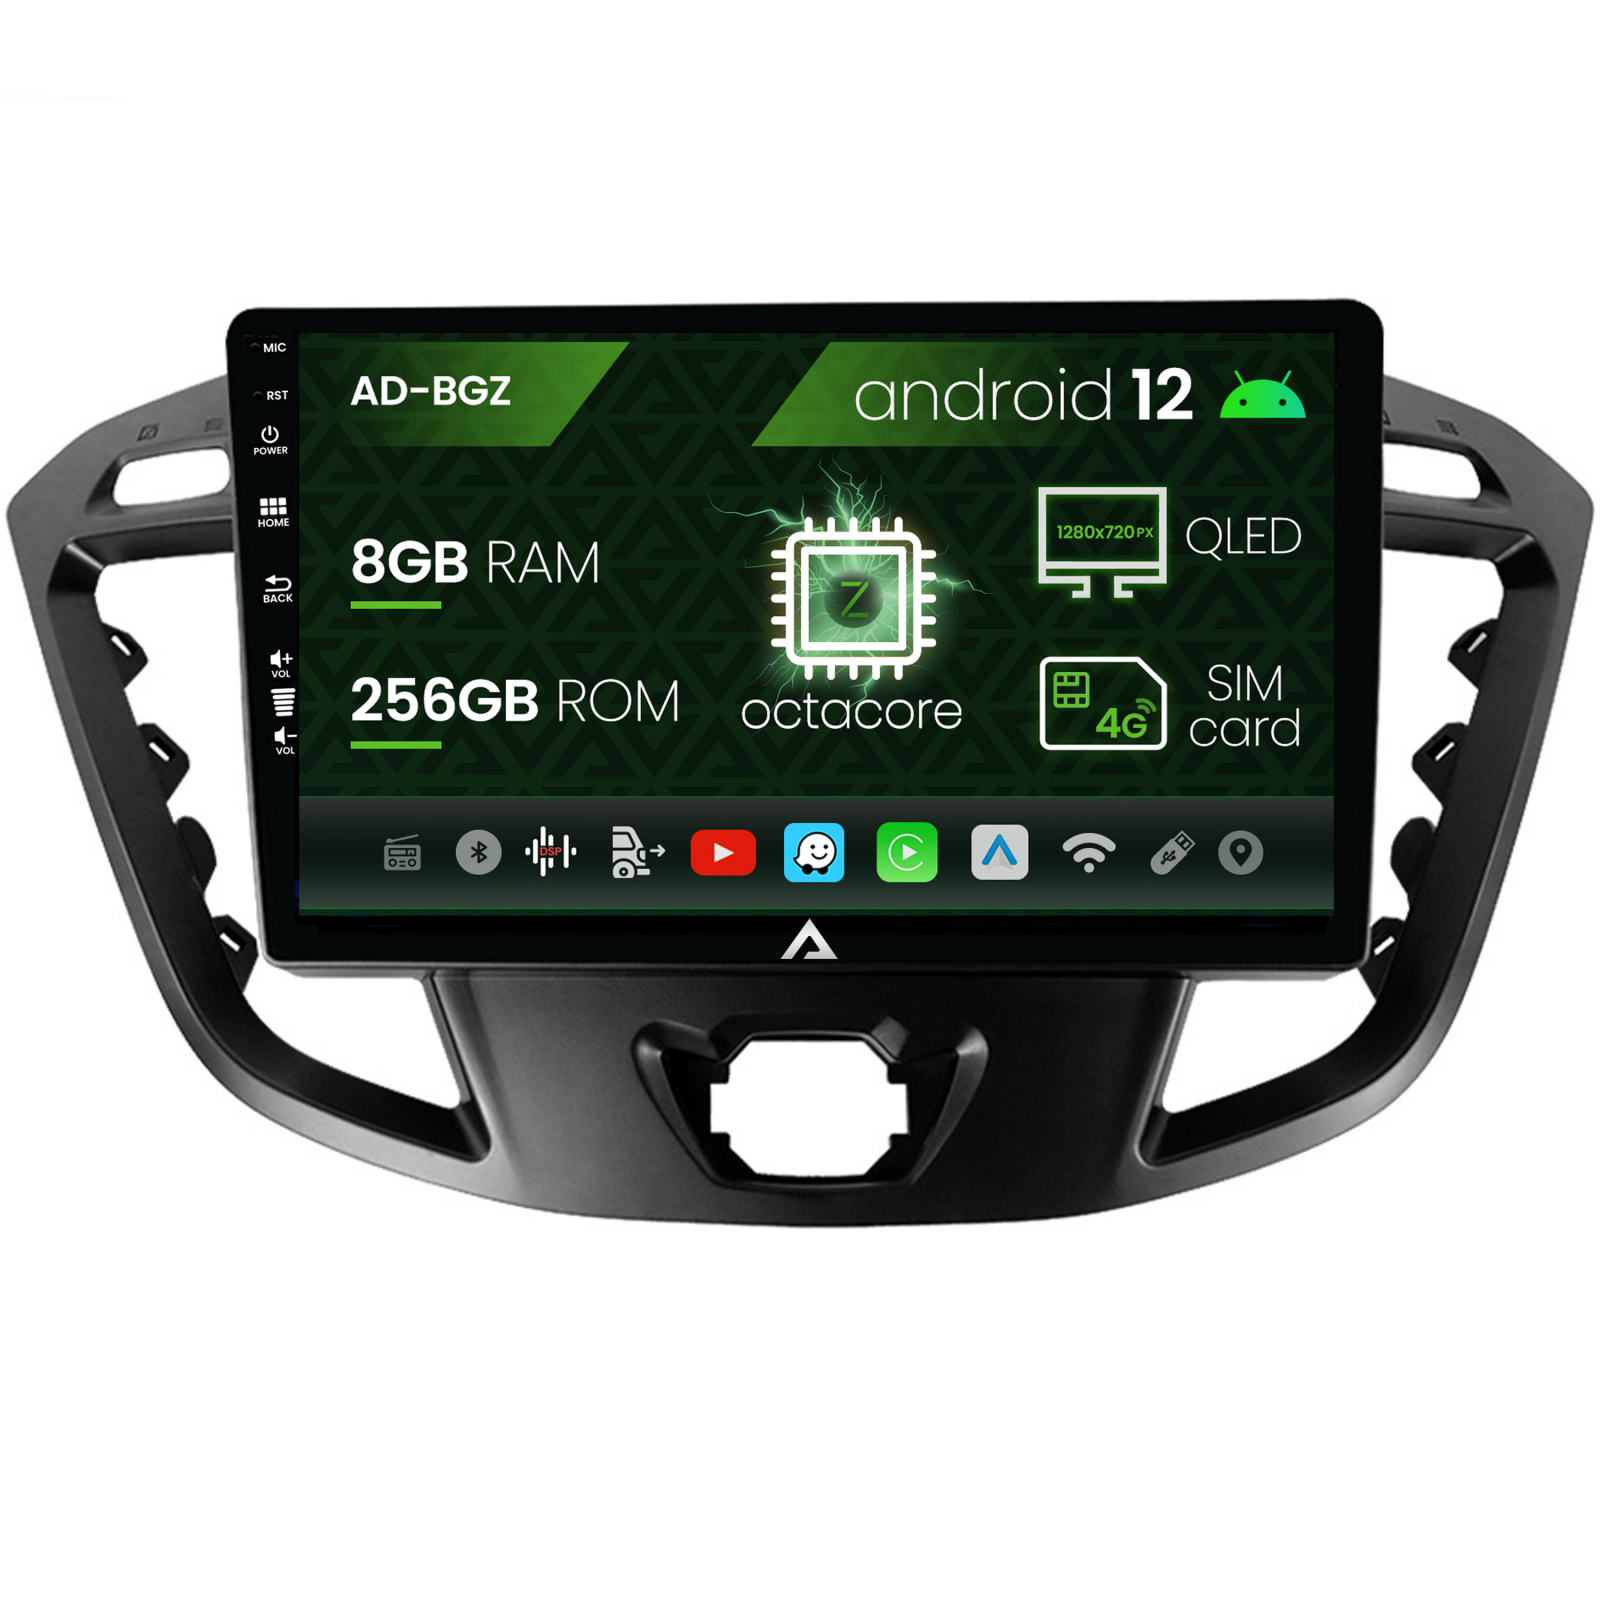 Navigatie Ford Transit / Tourneo (2012-2020), Android 12, Z-Octacore / 8GB RAM + 256GB ROM, 9 Inch - AD-BGZ9008+AD-BGRKIT123